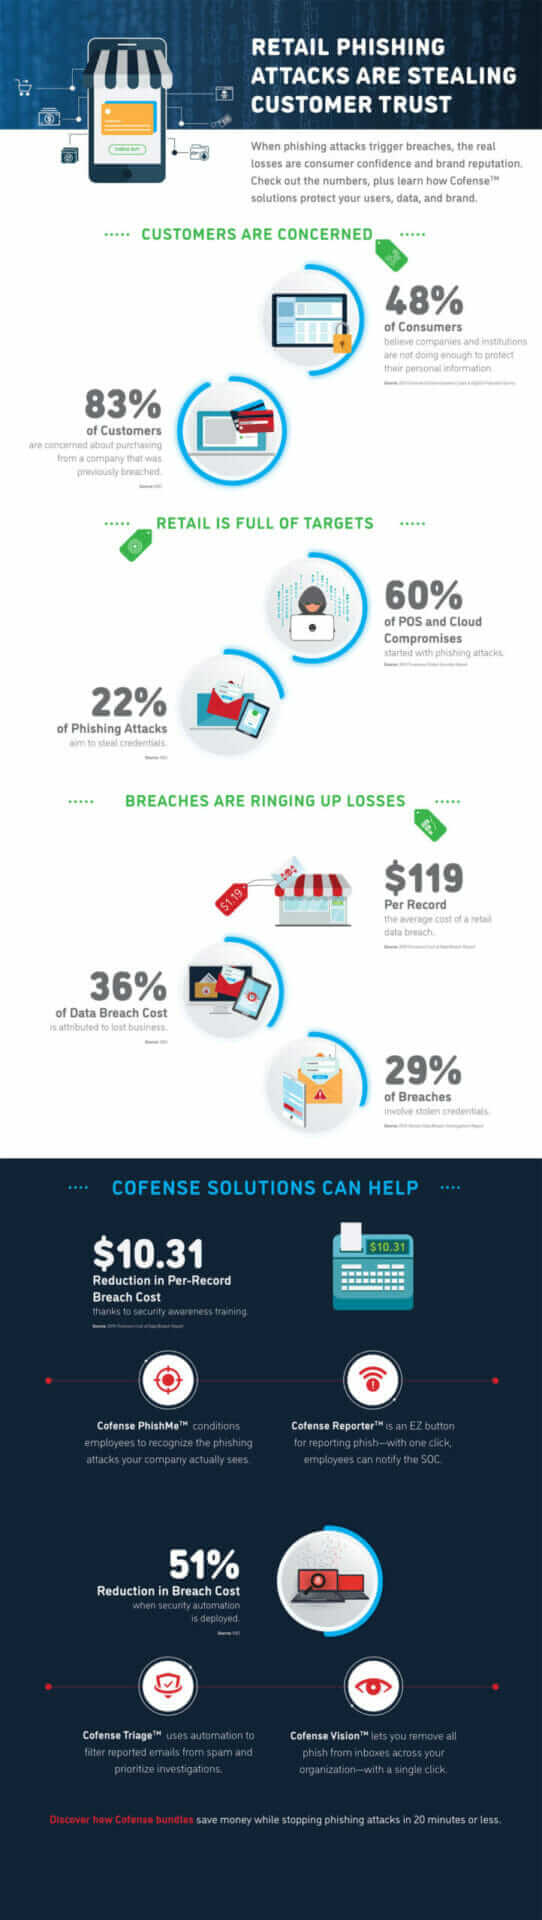 Infographic on Retail Email Security Threats by Cofense - Image 12